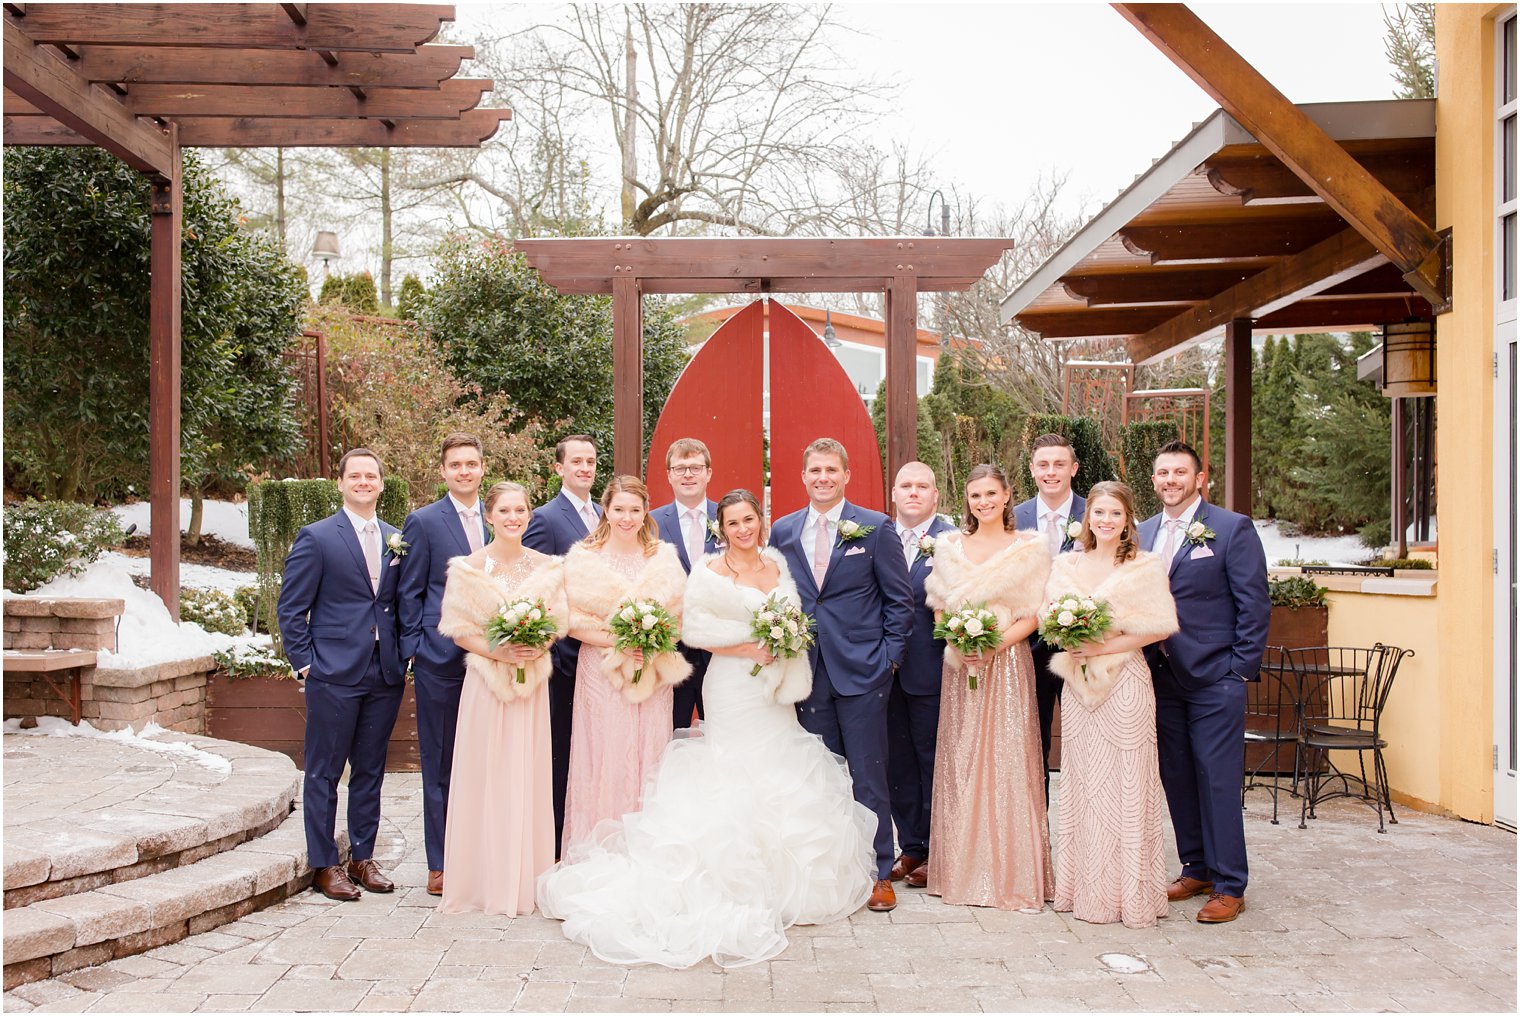 Bridal party during winter wedding at Stone House at Stirling Ridge in Warren, NJ